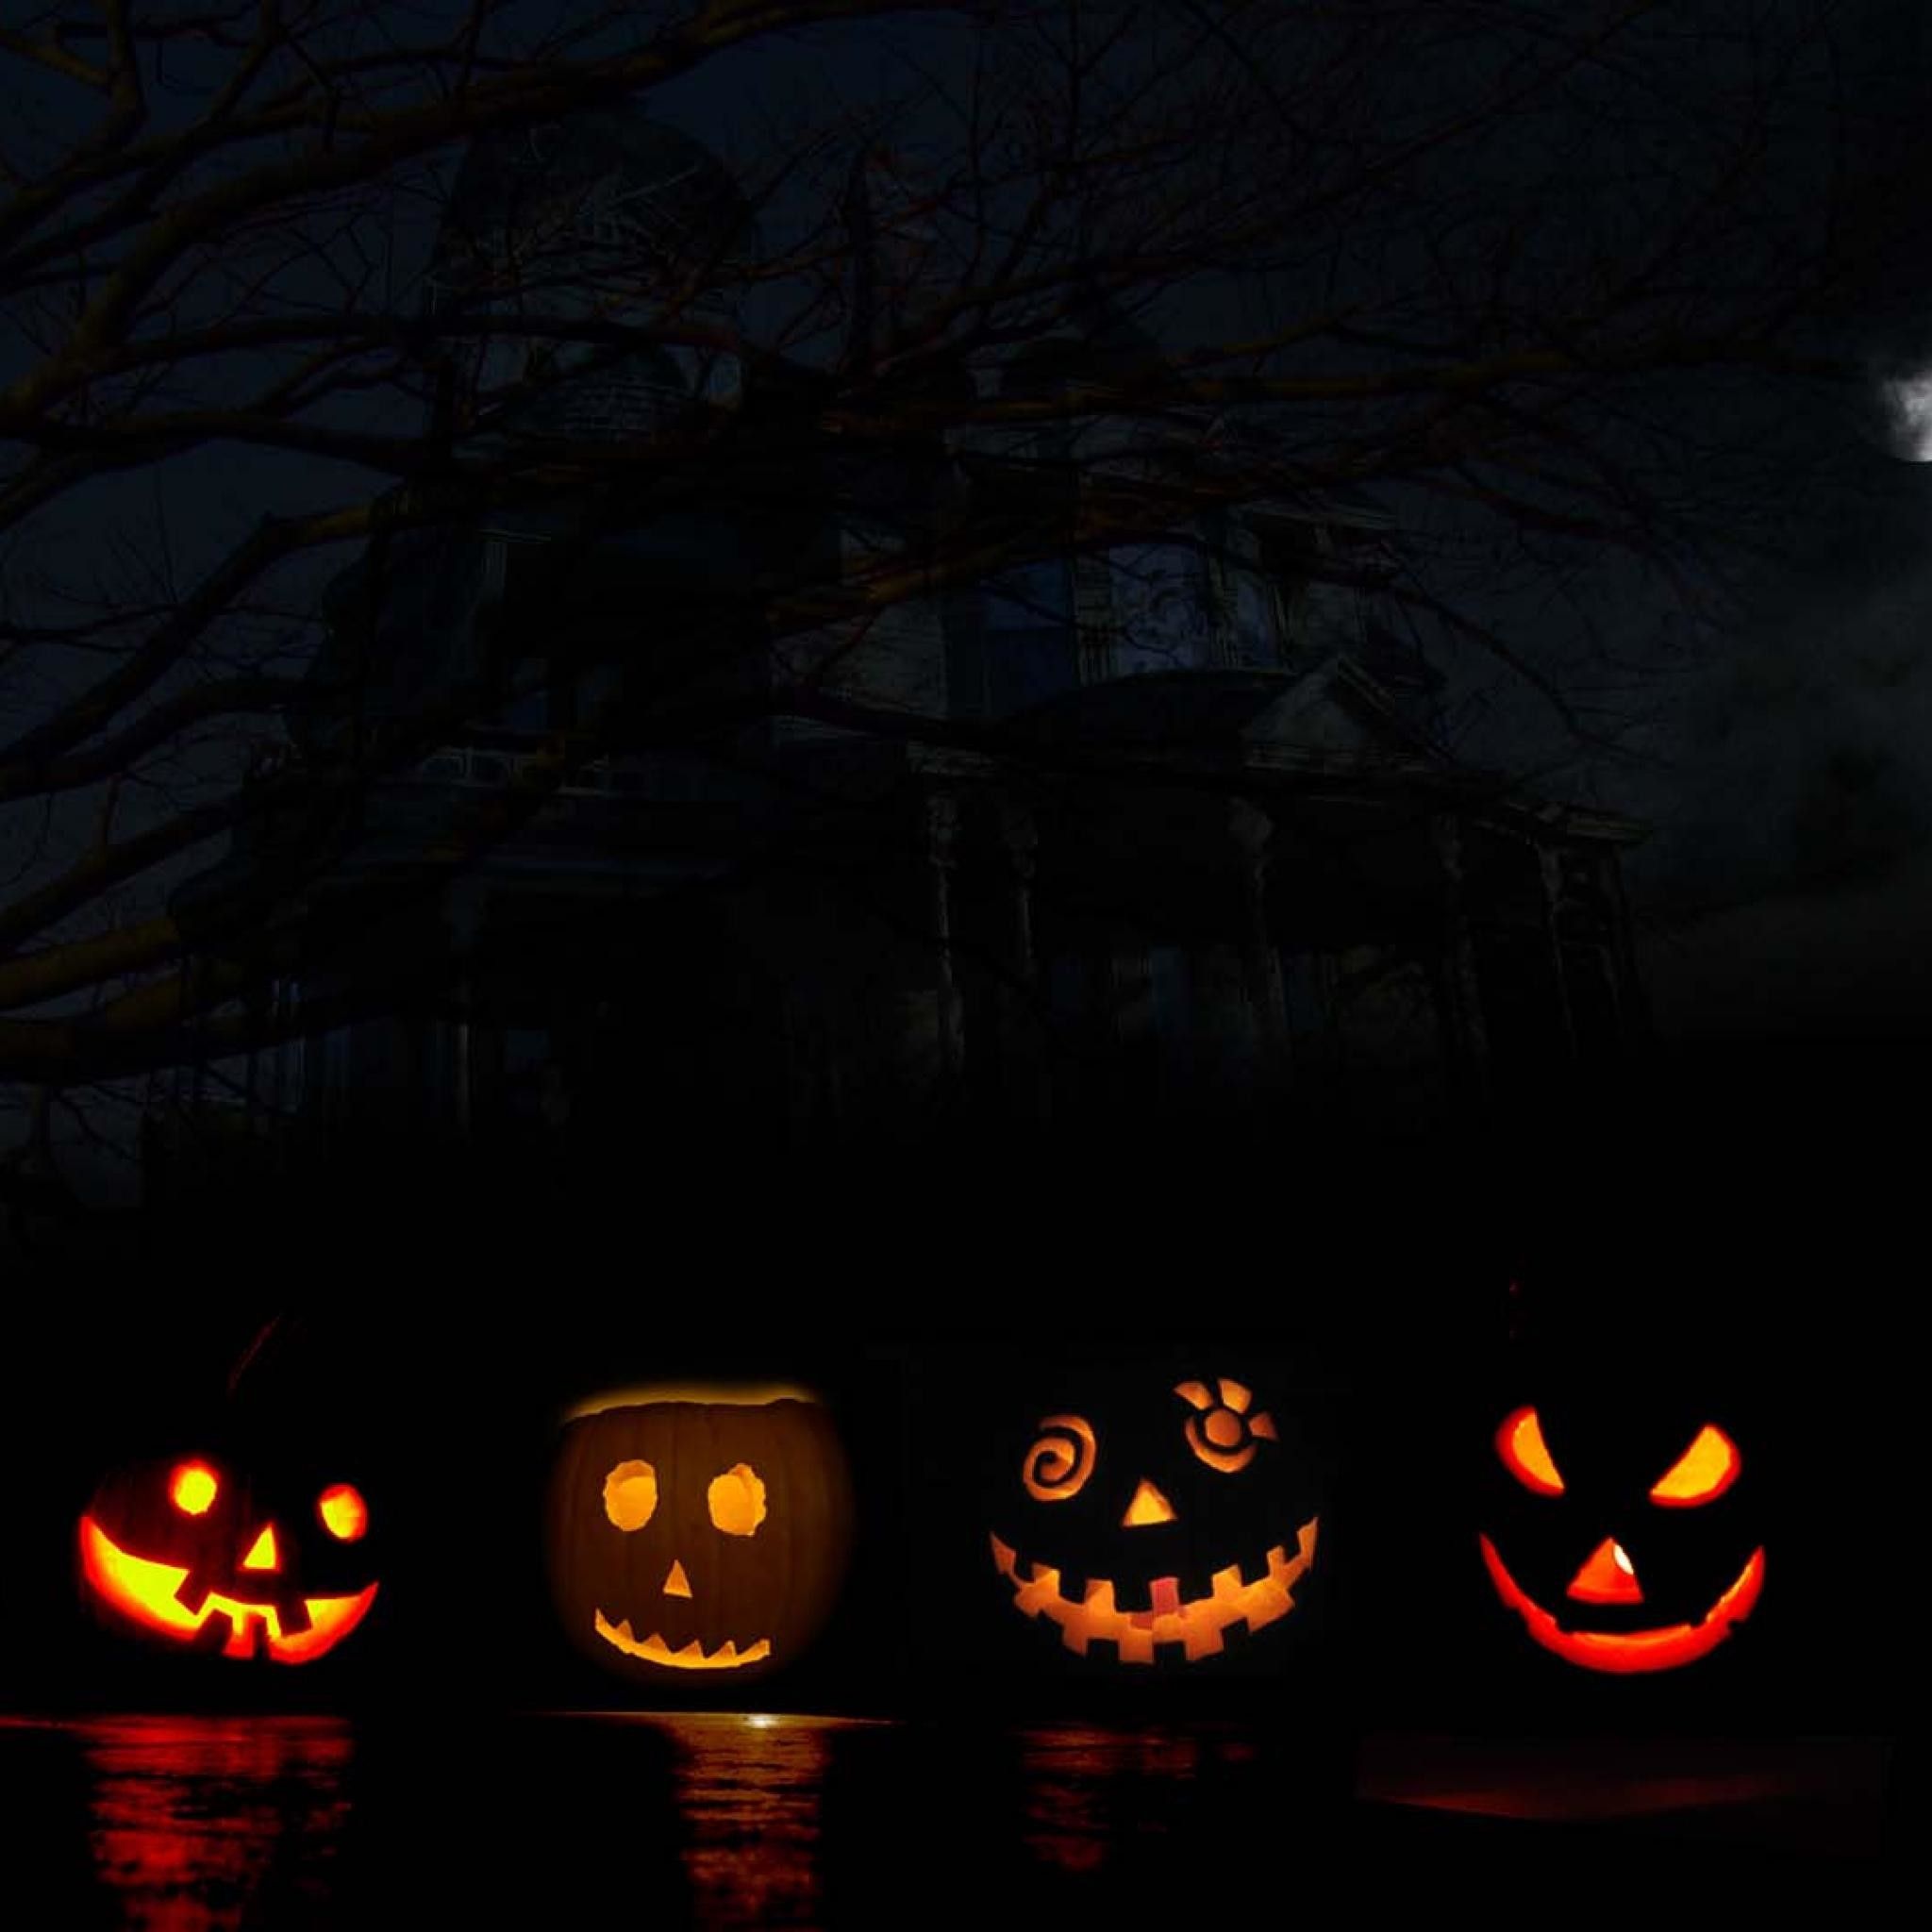 Live Photo iPhone Wallpaper. Scary halloween pumpkins, Pumpkin wallpaper, Halloween wallpaper